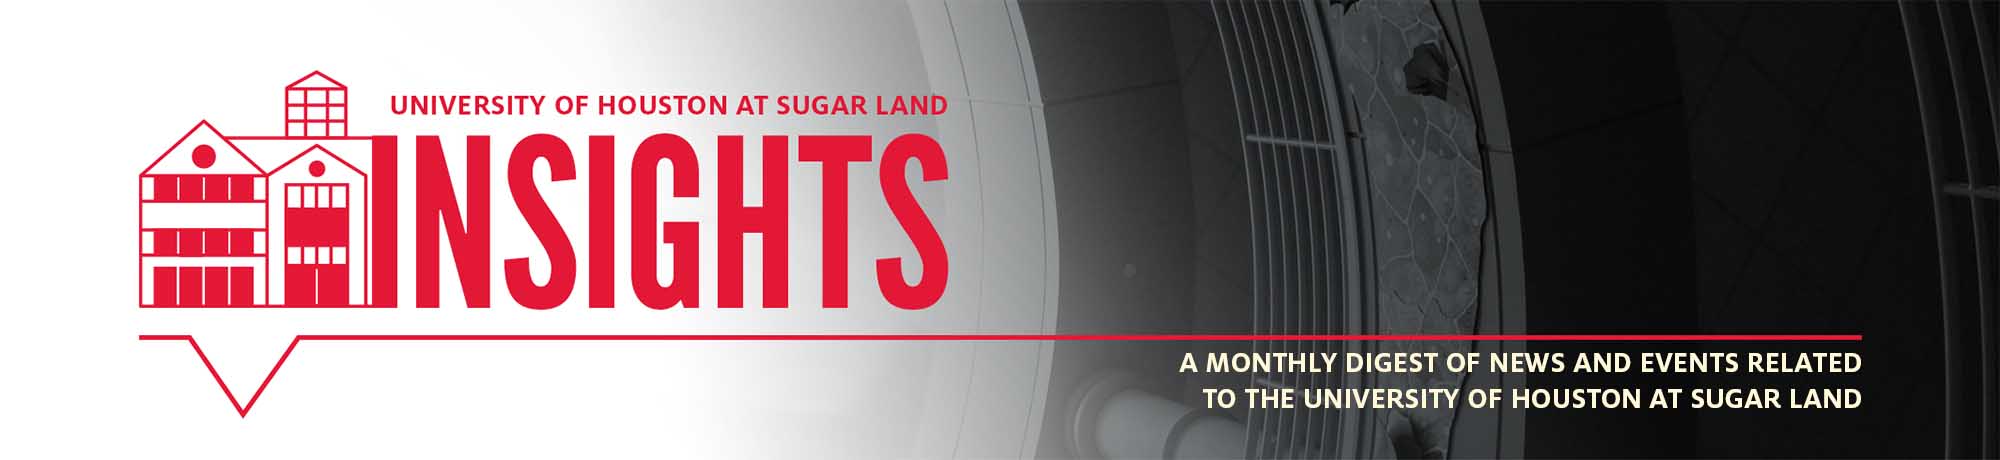 University of Houston at Sugar Land Insights: A monthly digest of news and events related to the University of Houston at Sugar Land